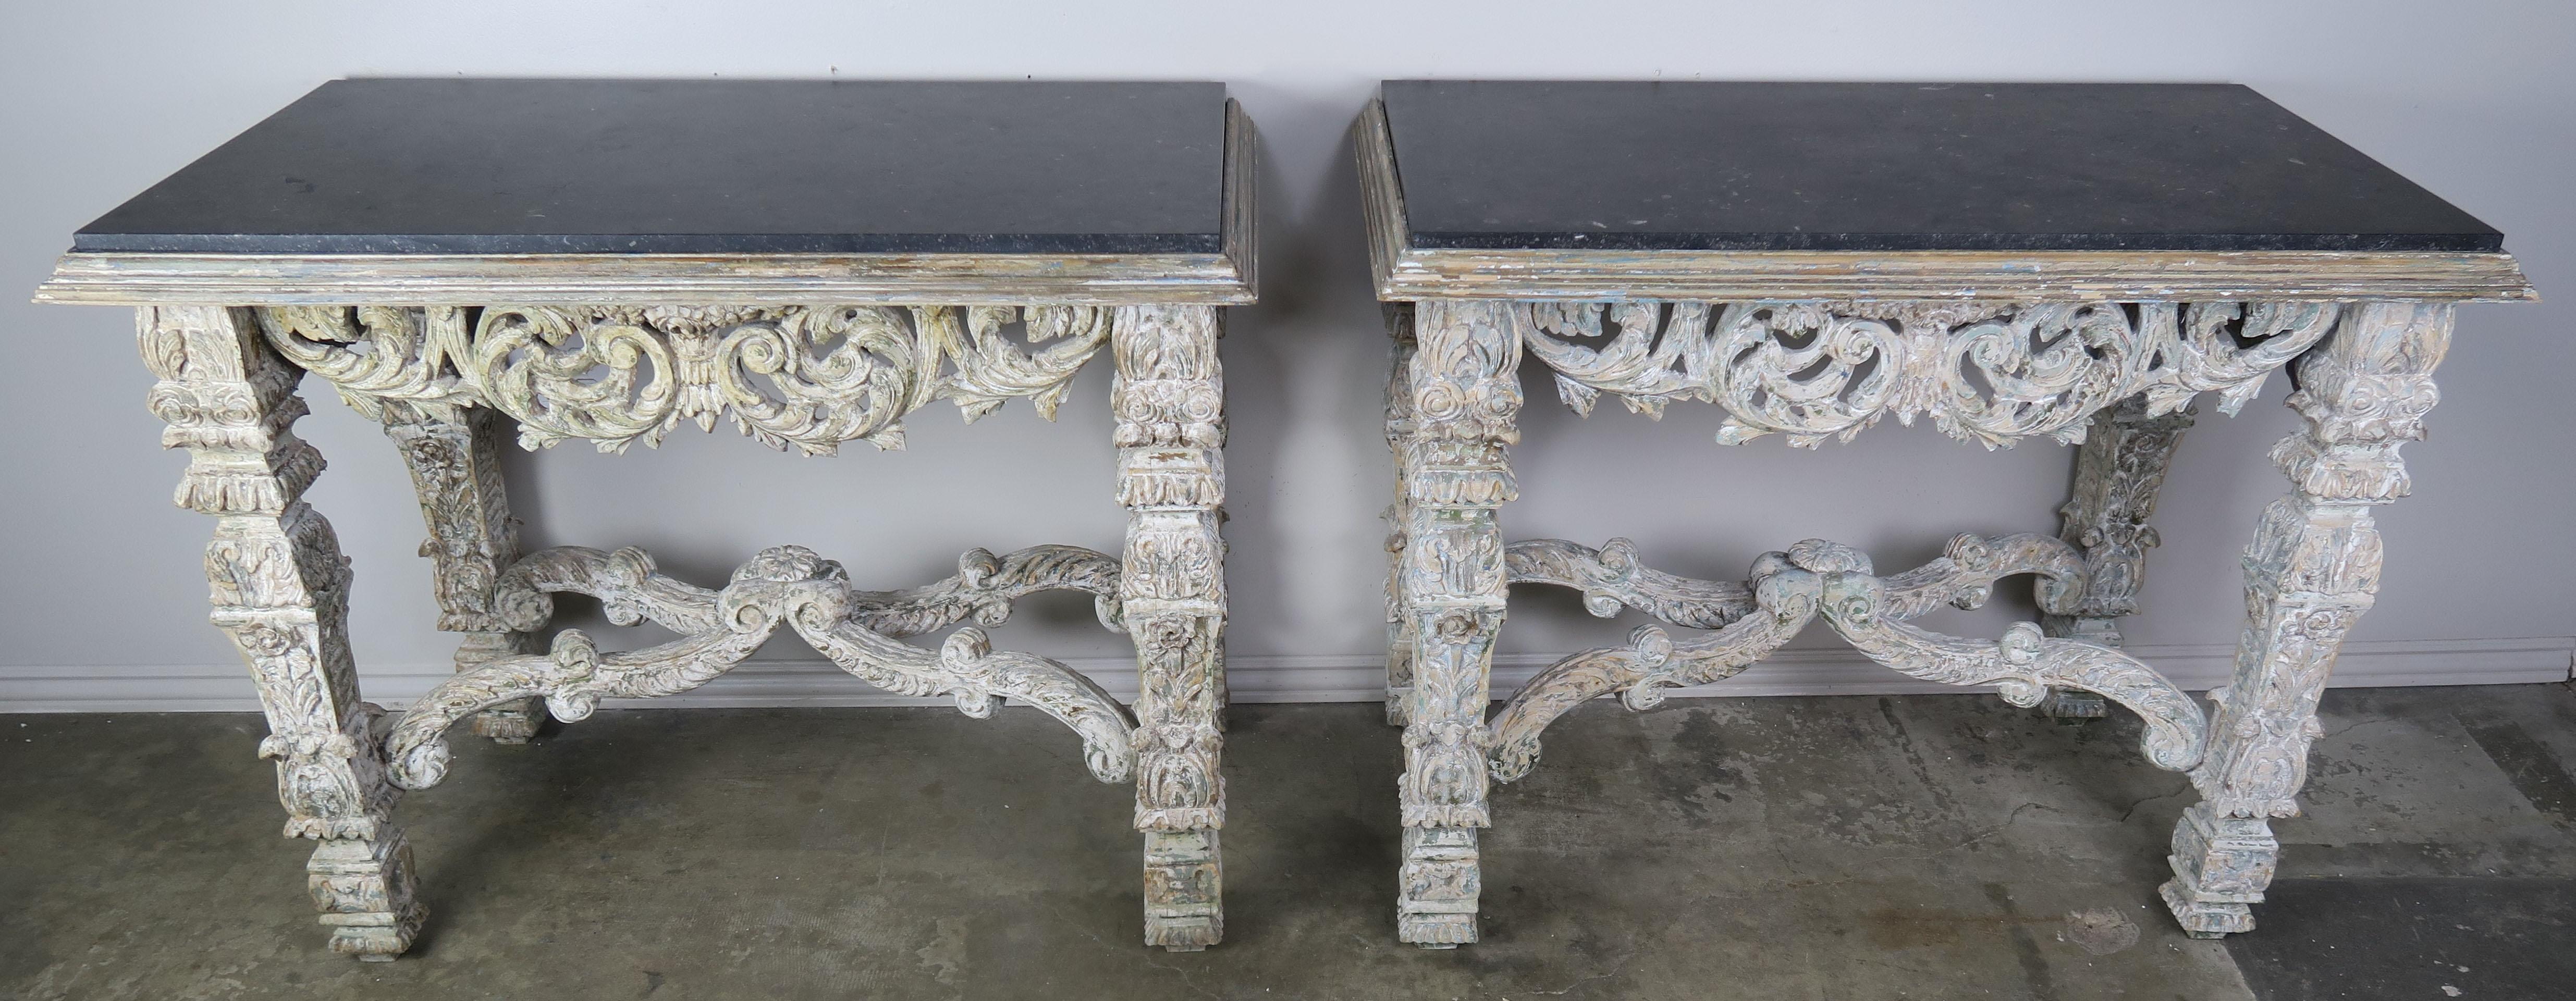 Pair of Italian Baroque style painted consoles beautifully hand-carved with swirling acanthus leaves, flowers, and various patterns throughout. The tables stand on four heavily carved straight legs that are connected by a center stretcher. Inset